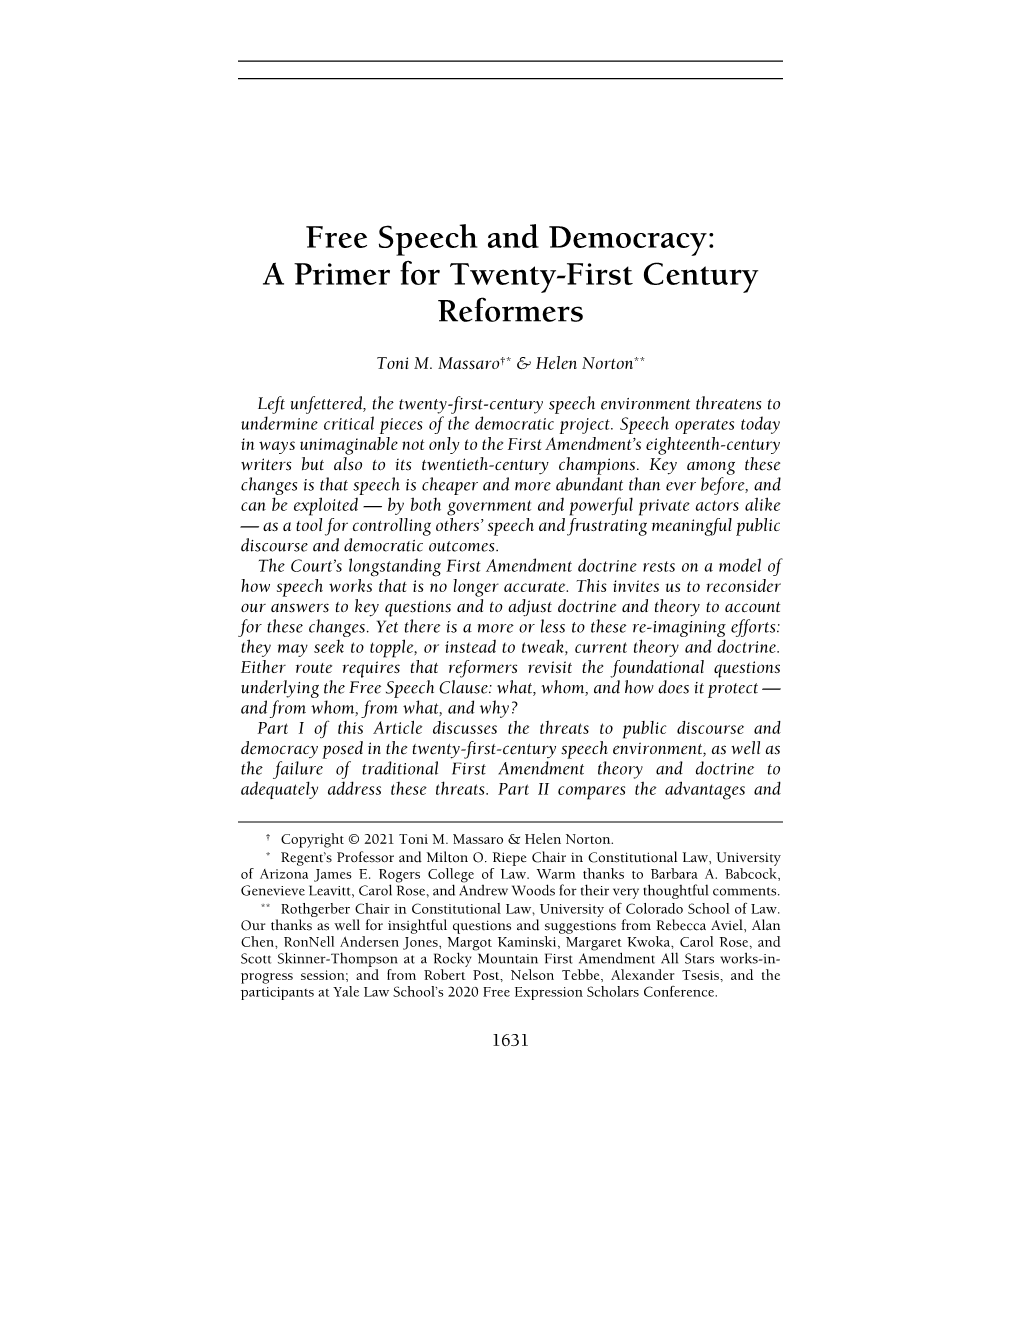 Free Speech and Democracy: a Primer for Twenty-First Century Reformers